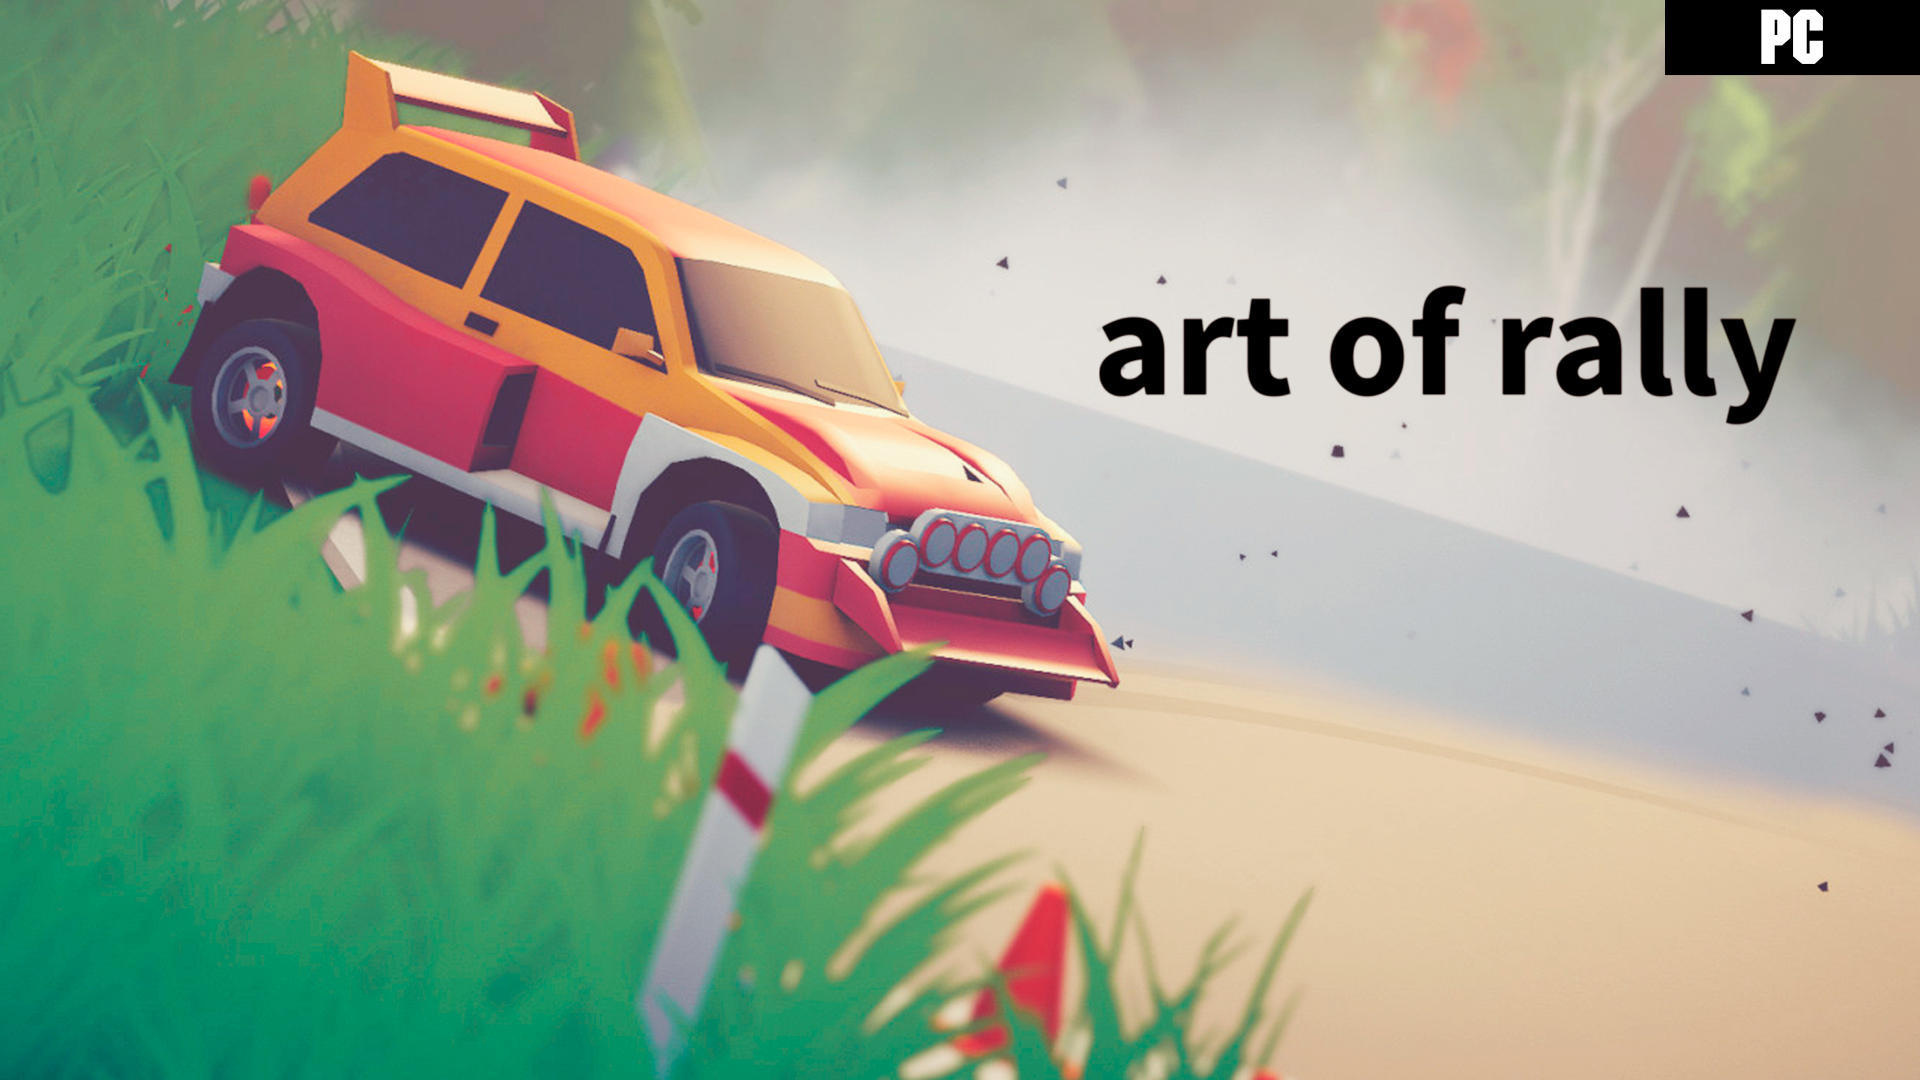 art of rally barely keeping it together achievement